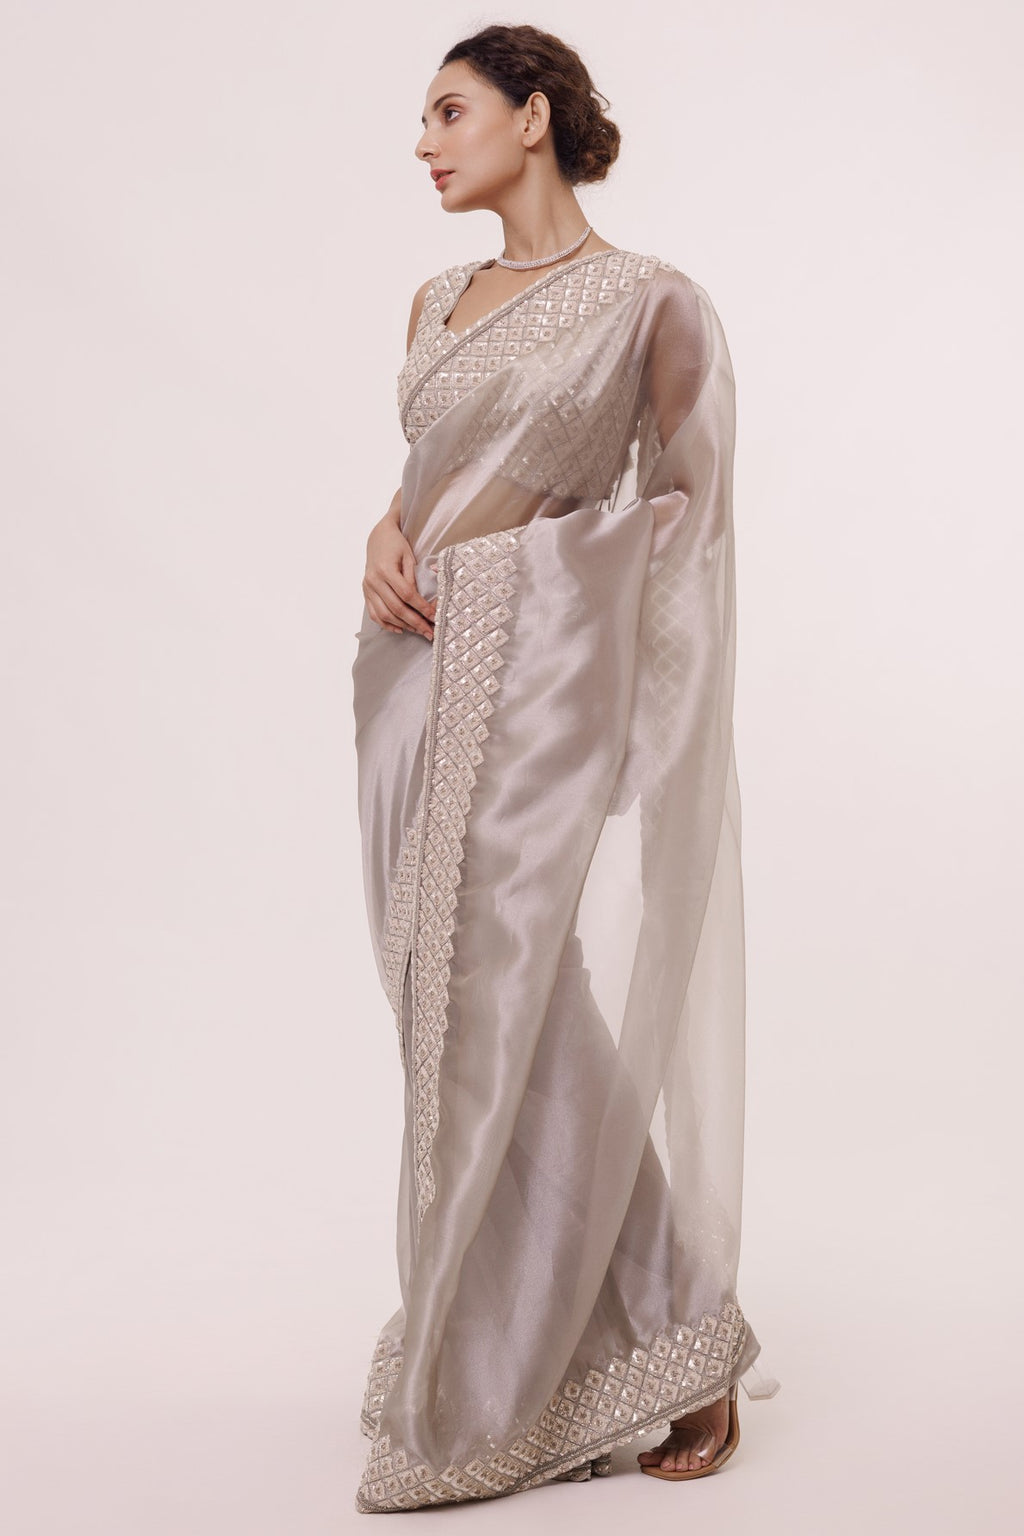 Buy beautiful metallic silver organza saree online in USA with embroidered border and saree blouse. Look your best at parties and weddings in exquisite designer sarees, embroidered sarees, handloom sarees, silk sarees, organza saris from Pure Elegance Indian saree store in USA.-full view